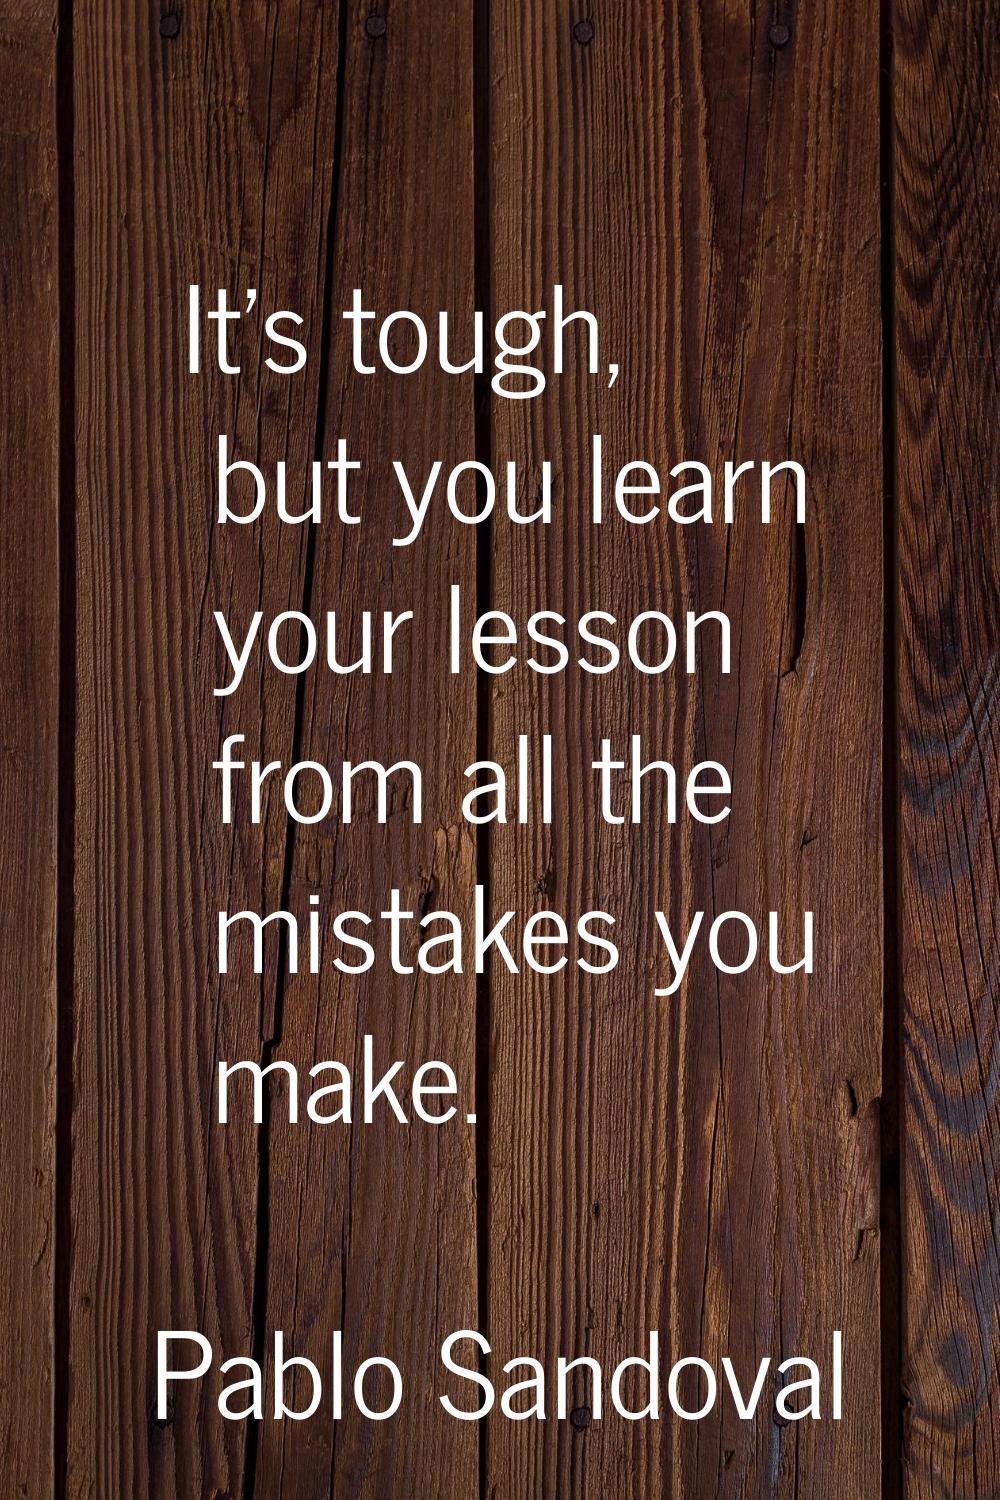 It's tough, but you learn your lesson from all the mistakes you make.